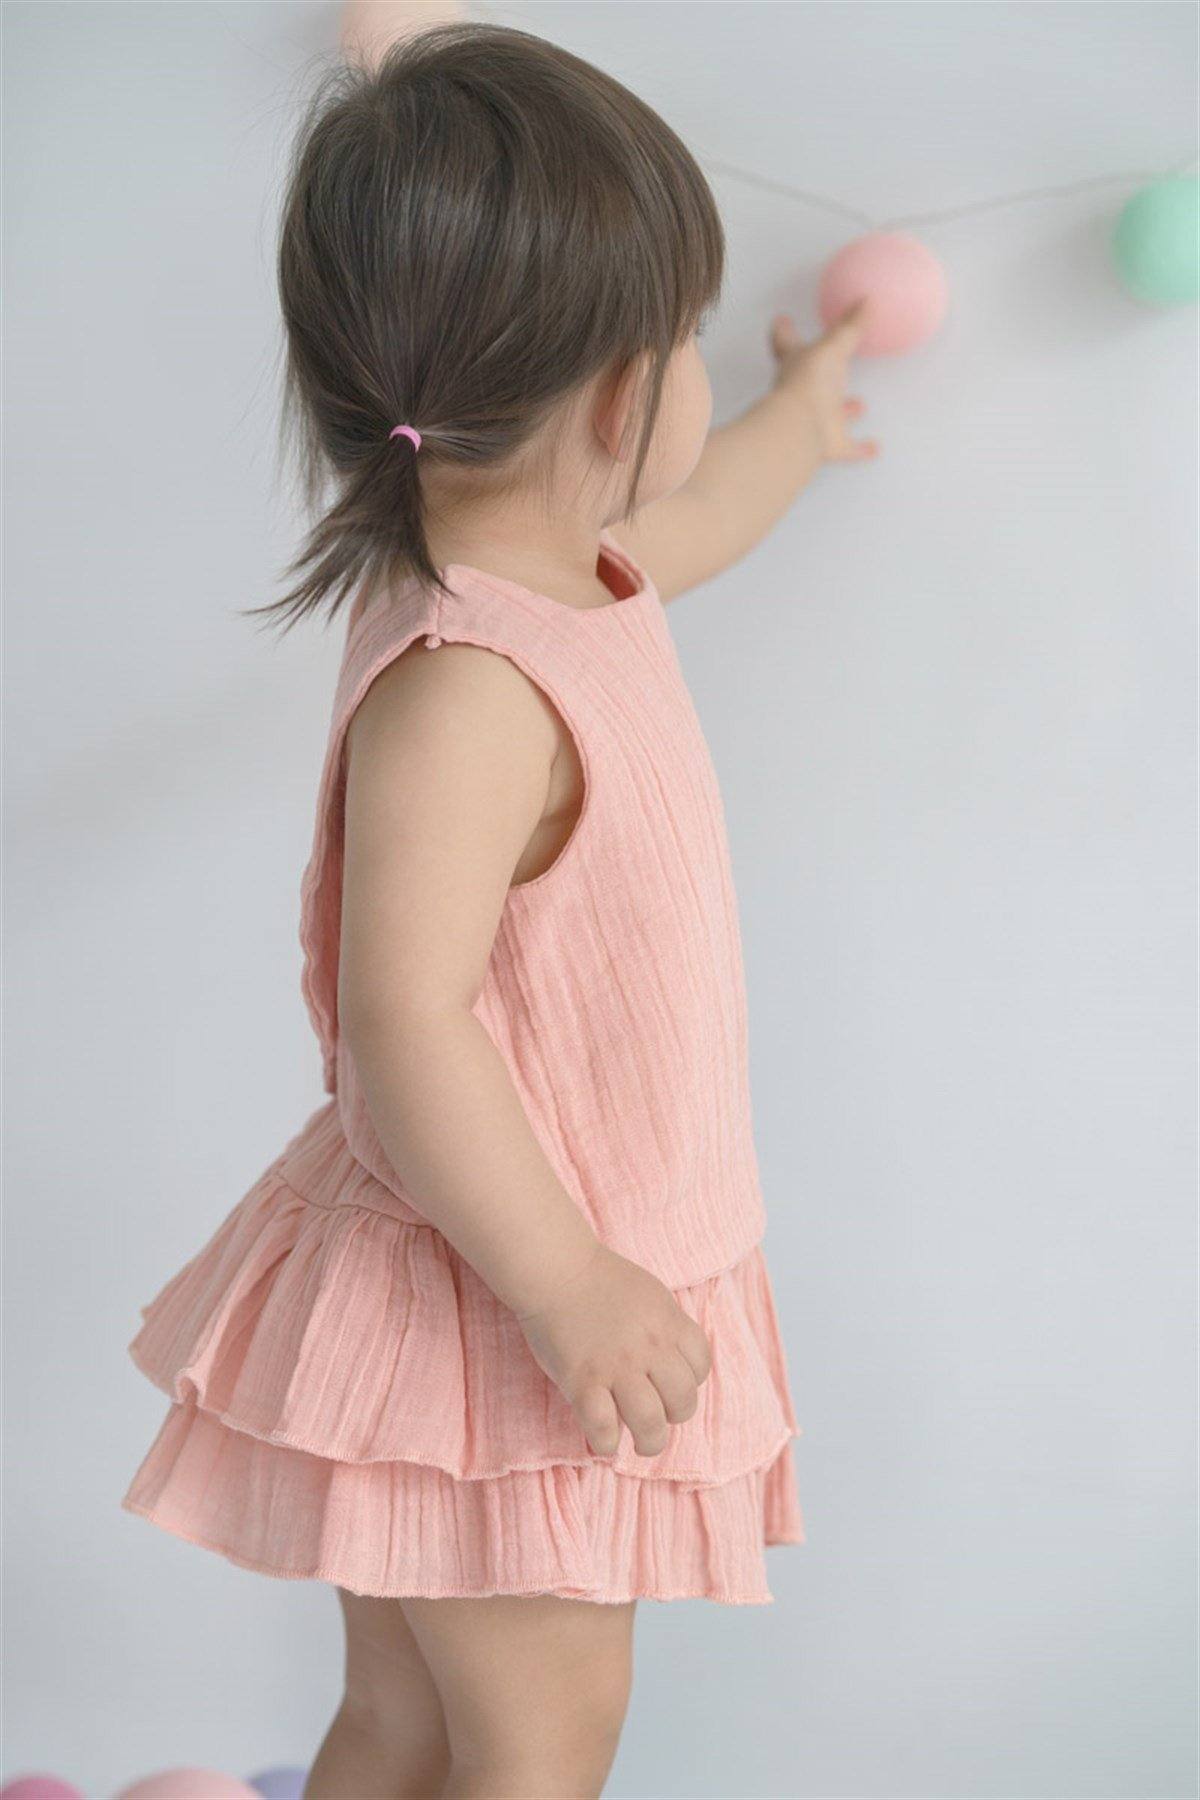 Vintage Rhapsody Organic Muslin Skirt with Blouse - Vintage Rhapsody Organic Muslin Skirt with Blouse - 3-6 Months - NilaKids - Melymod